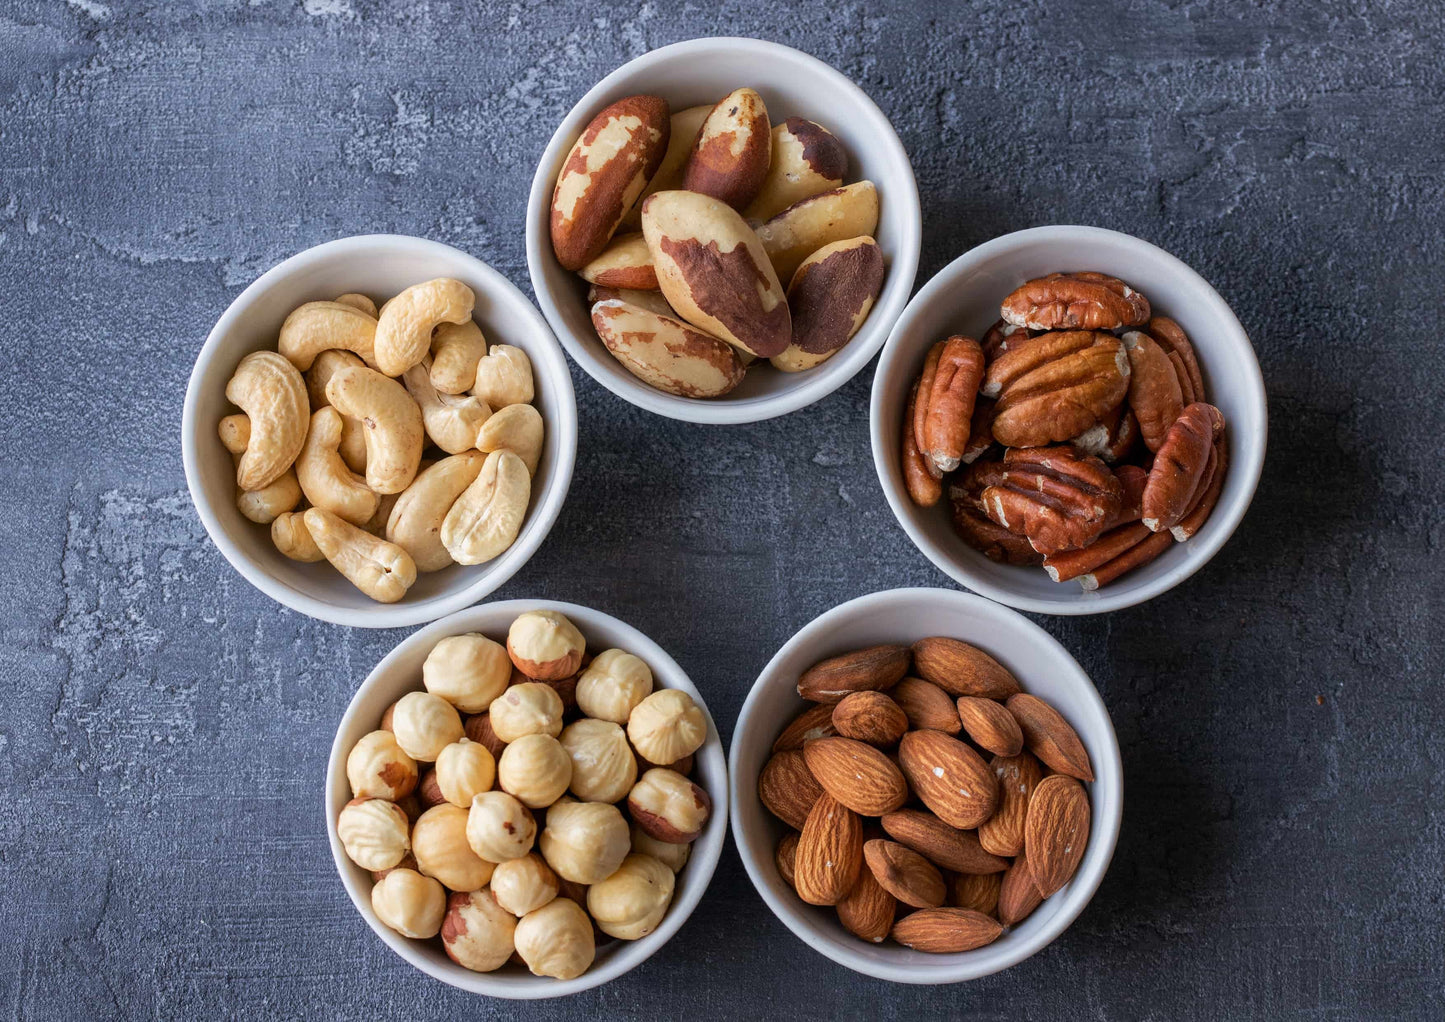 Deluxe Unsalted Nuts Mix – A Blend of Dry Roasted Pecans, Cashews, Hazelnuts, Almonds, Brazil Nuts. Oven Roasted, No Oil Added, Vegan, Kosher, Bulk. Wholesome Snack. Full of Protein, Fiber